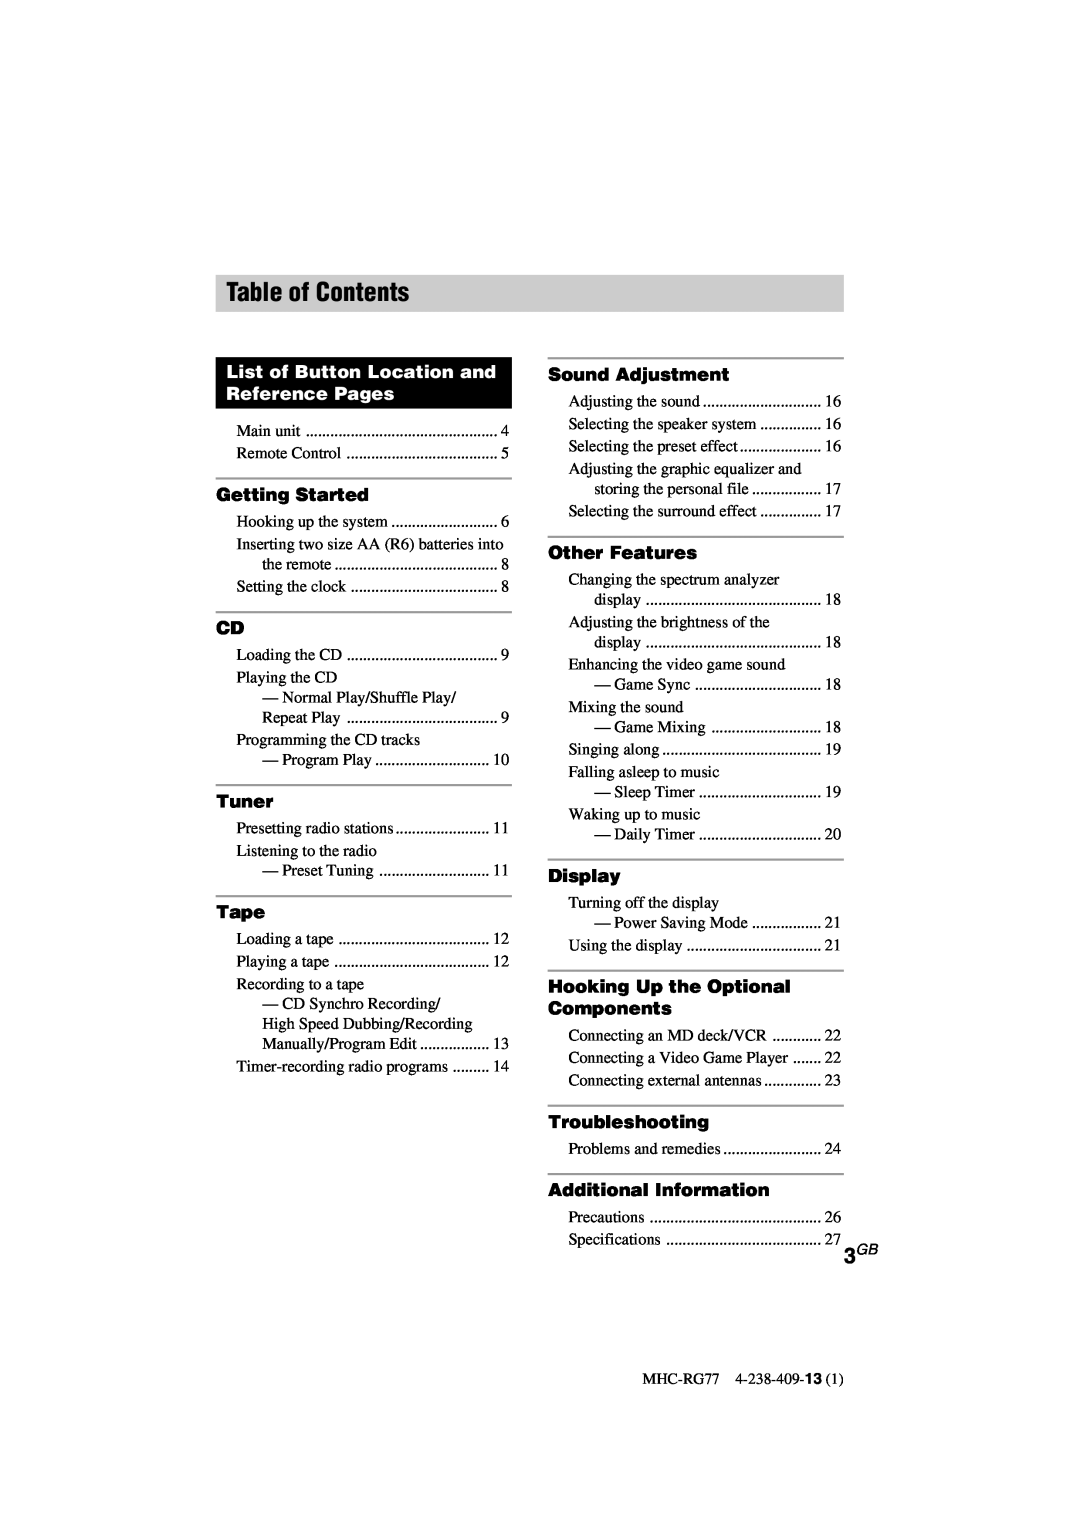 Sony MHC-GX8000/RG77 operating instructions Table of Contents, List of Button Location and Reference Pages 